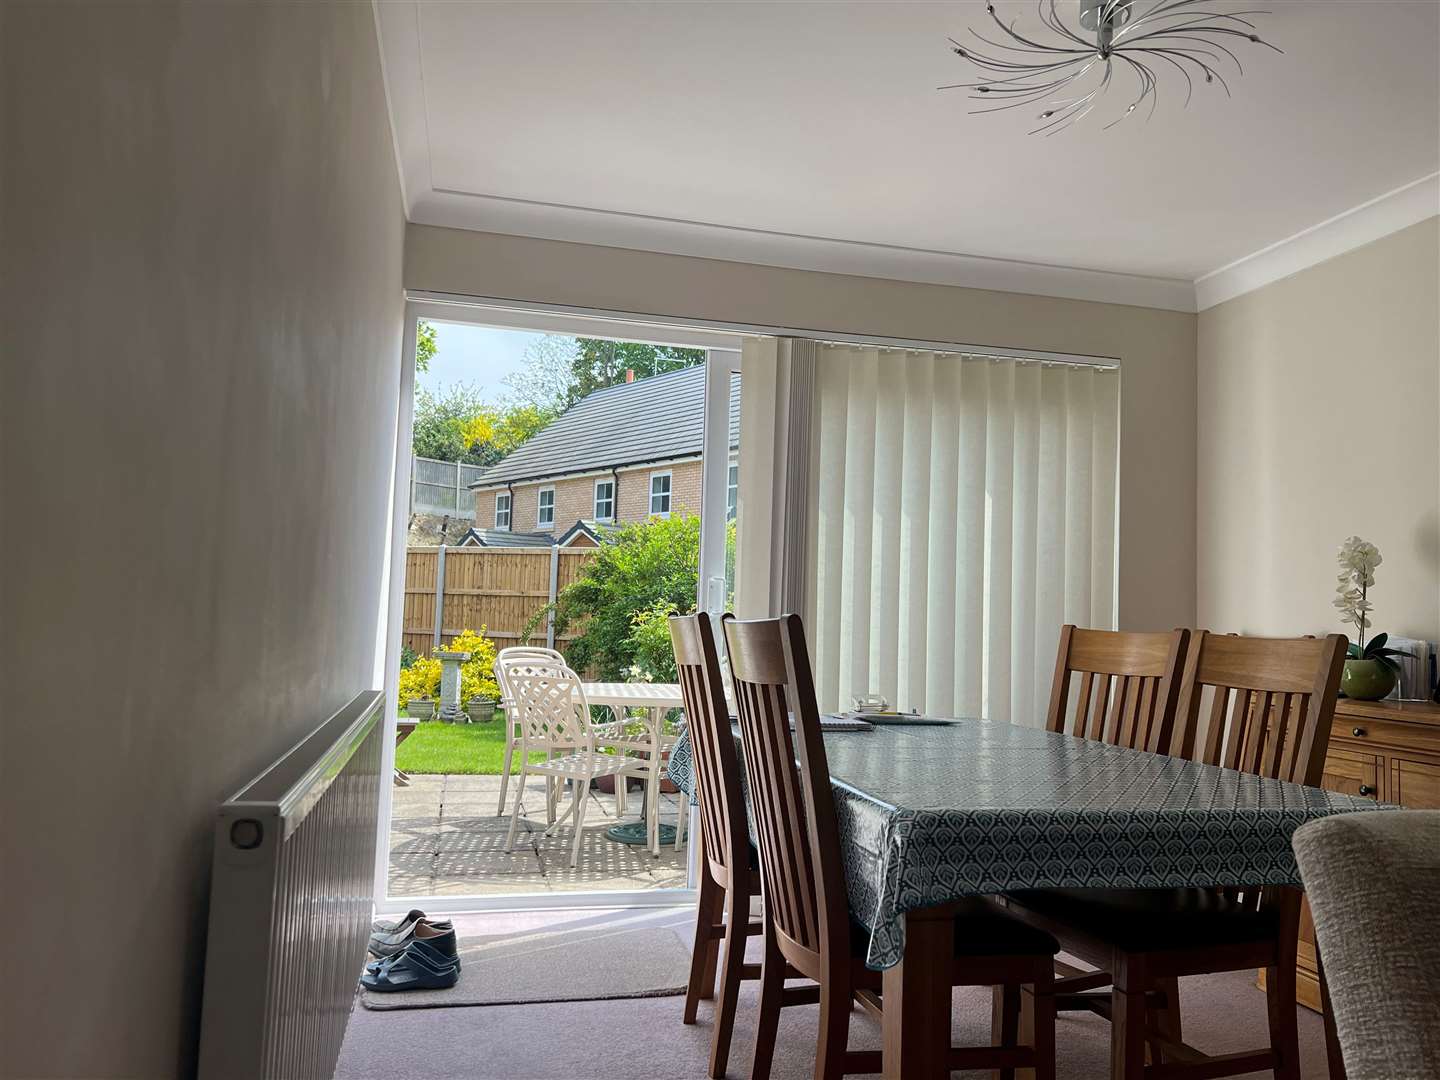 Plots three to five can be seen from the living rooms of the existing homes in Lydbrook Close. Picture: Megan Carr